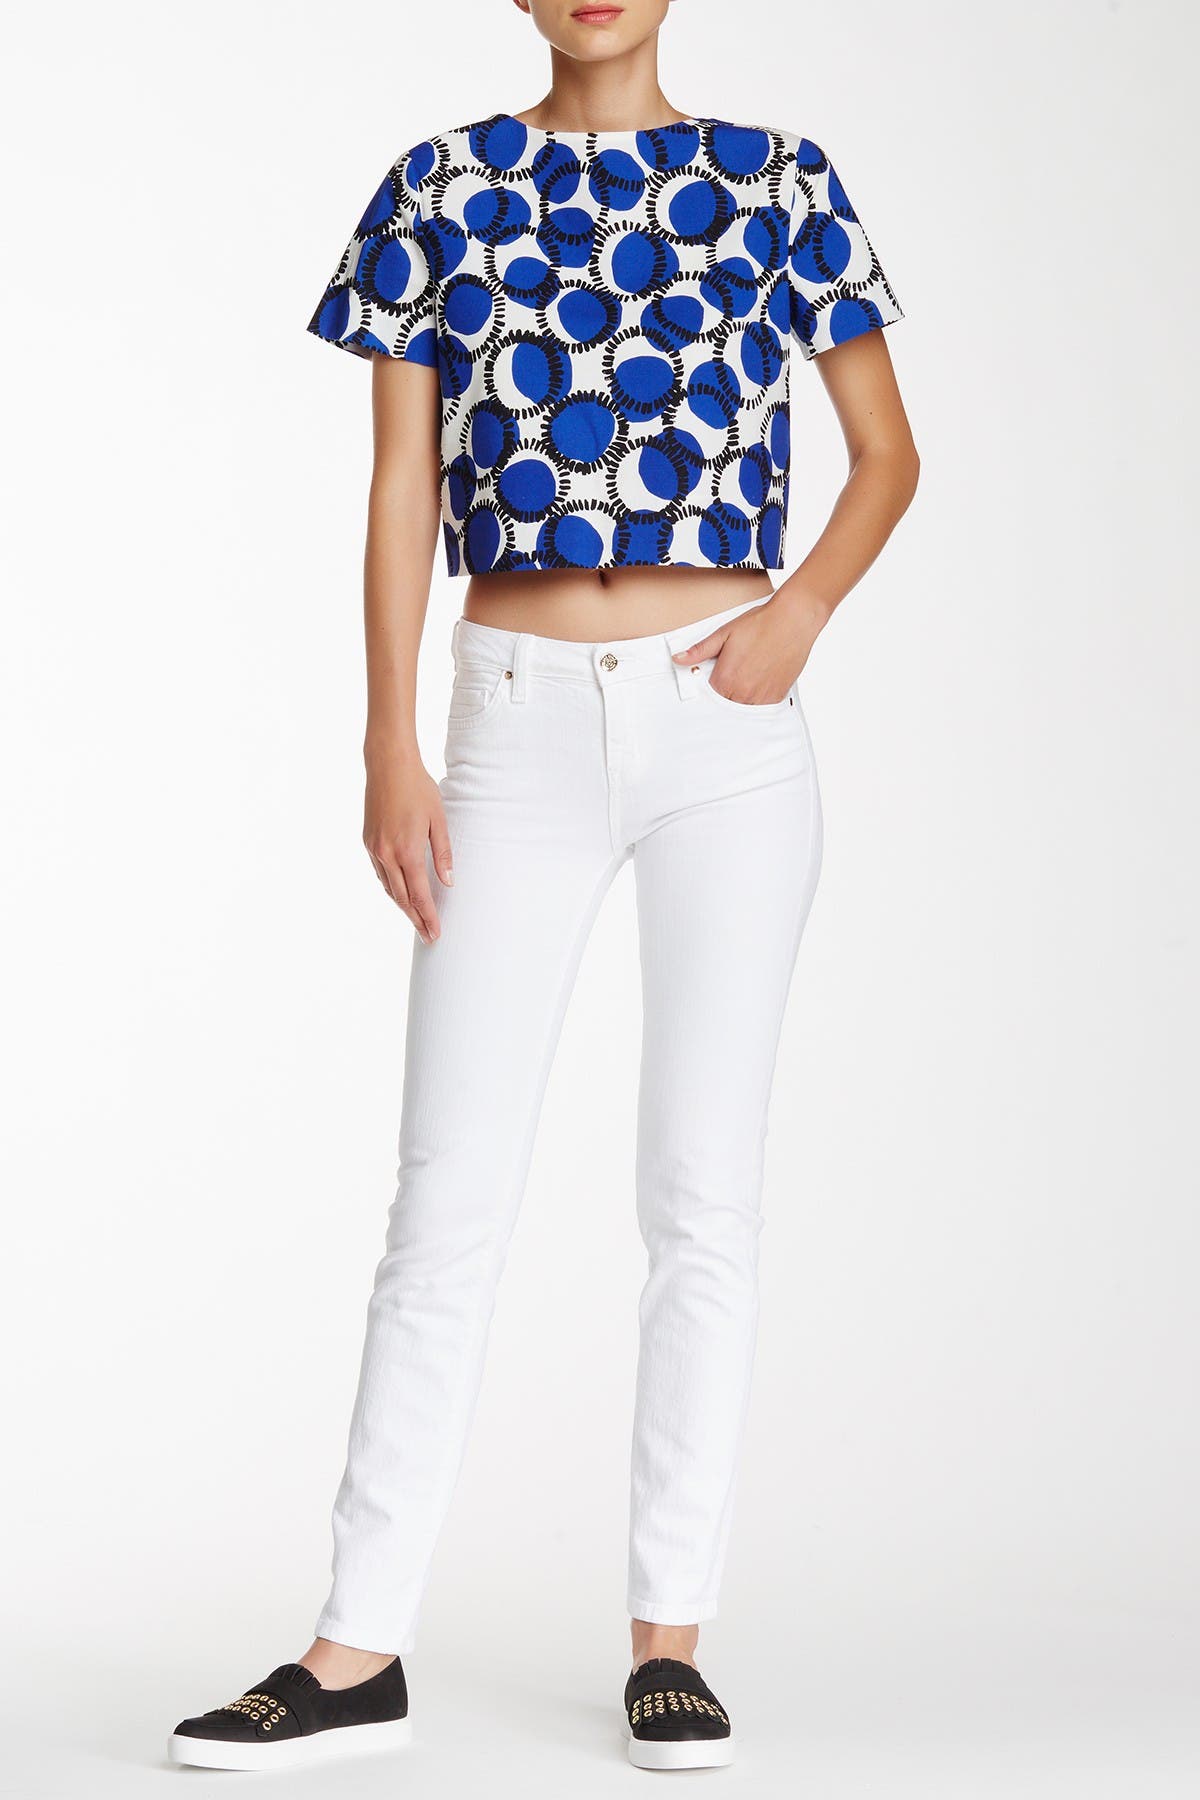 kate spade perry street jeans